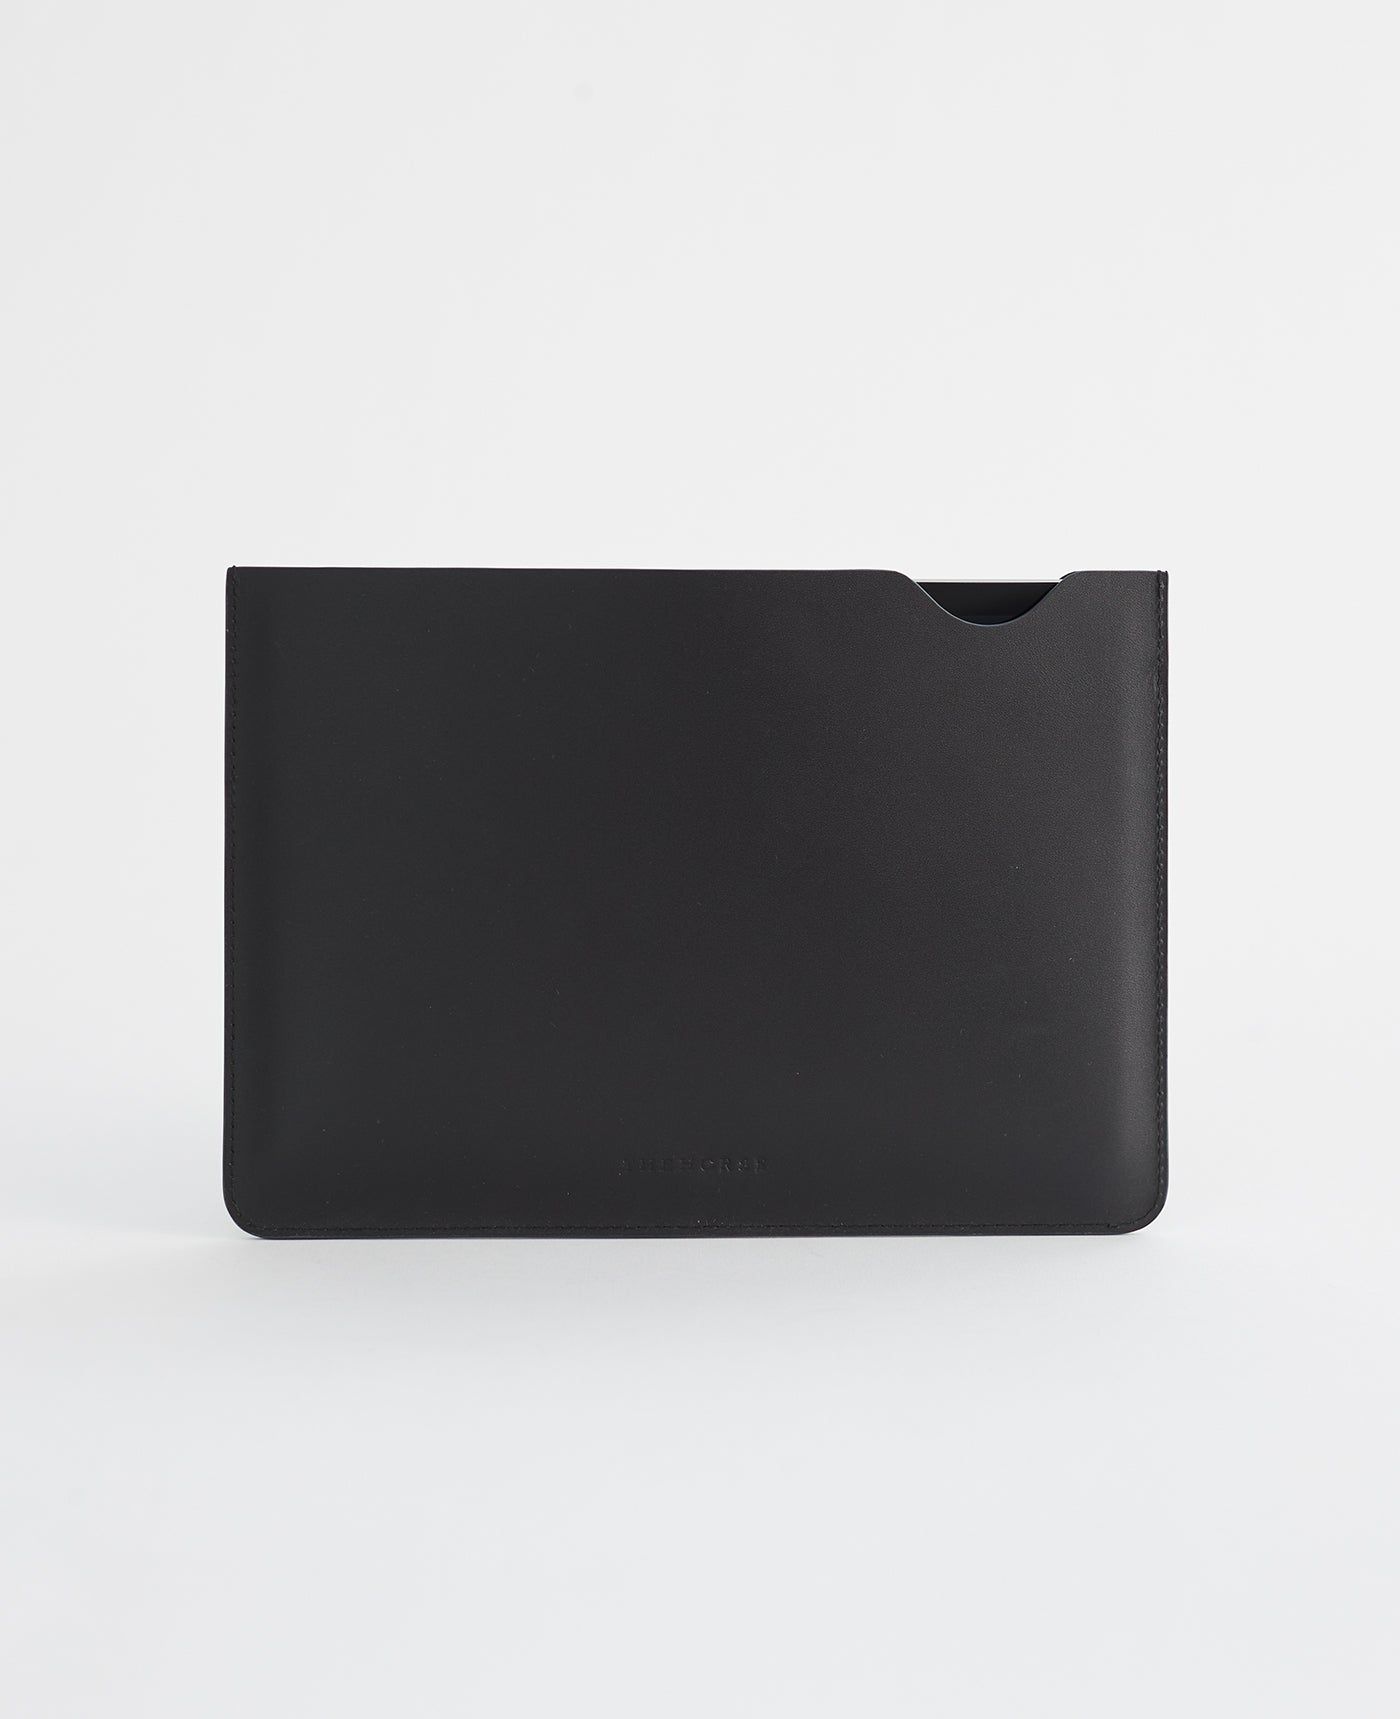 iPad Pro Leather Sleeve in Black by The Horse®